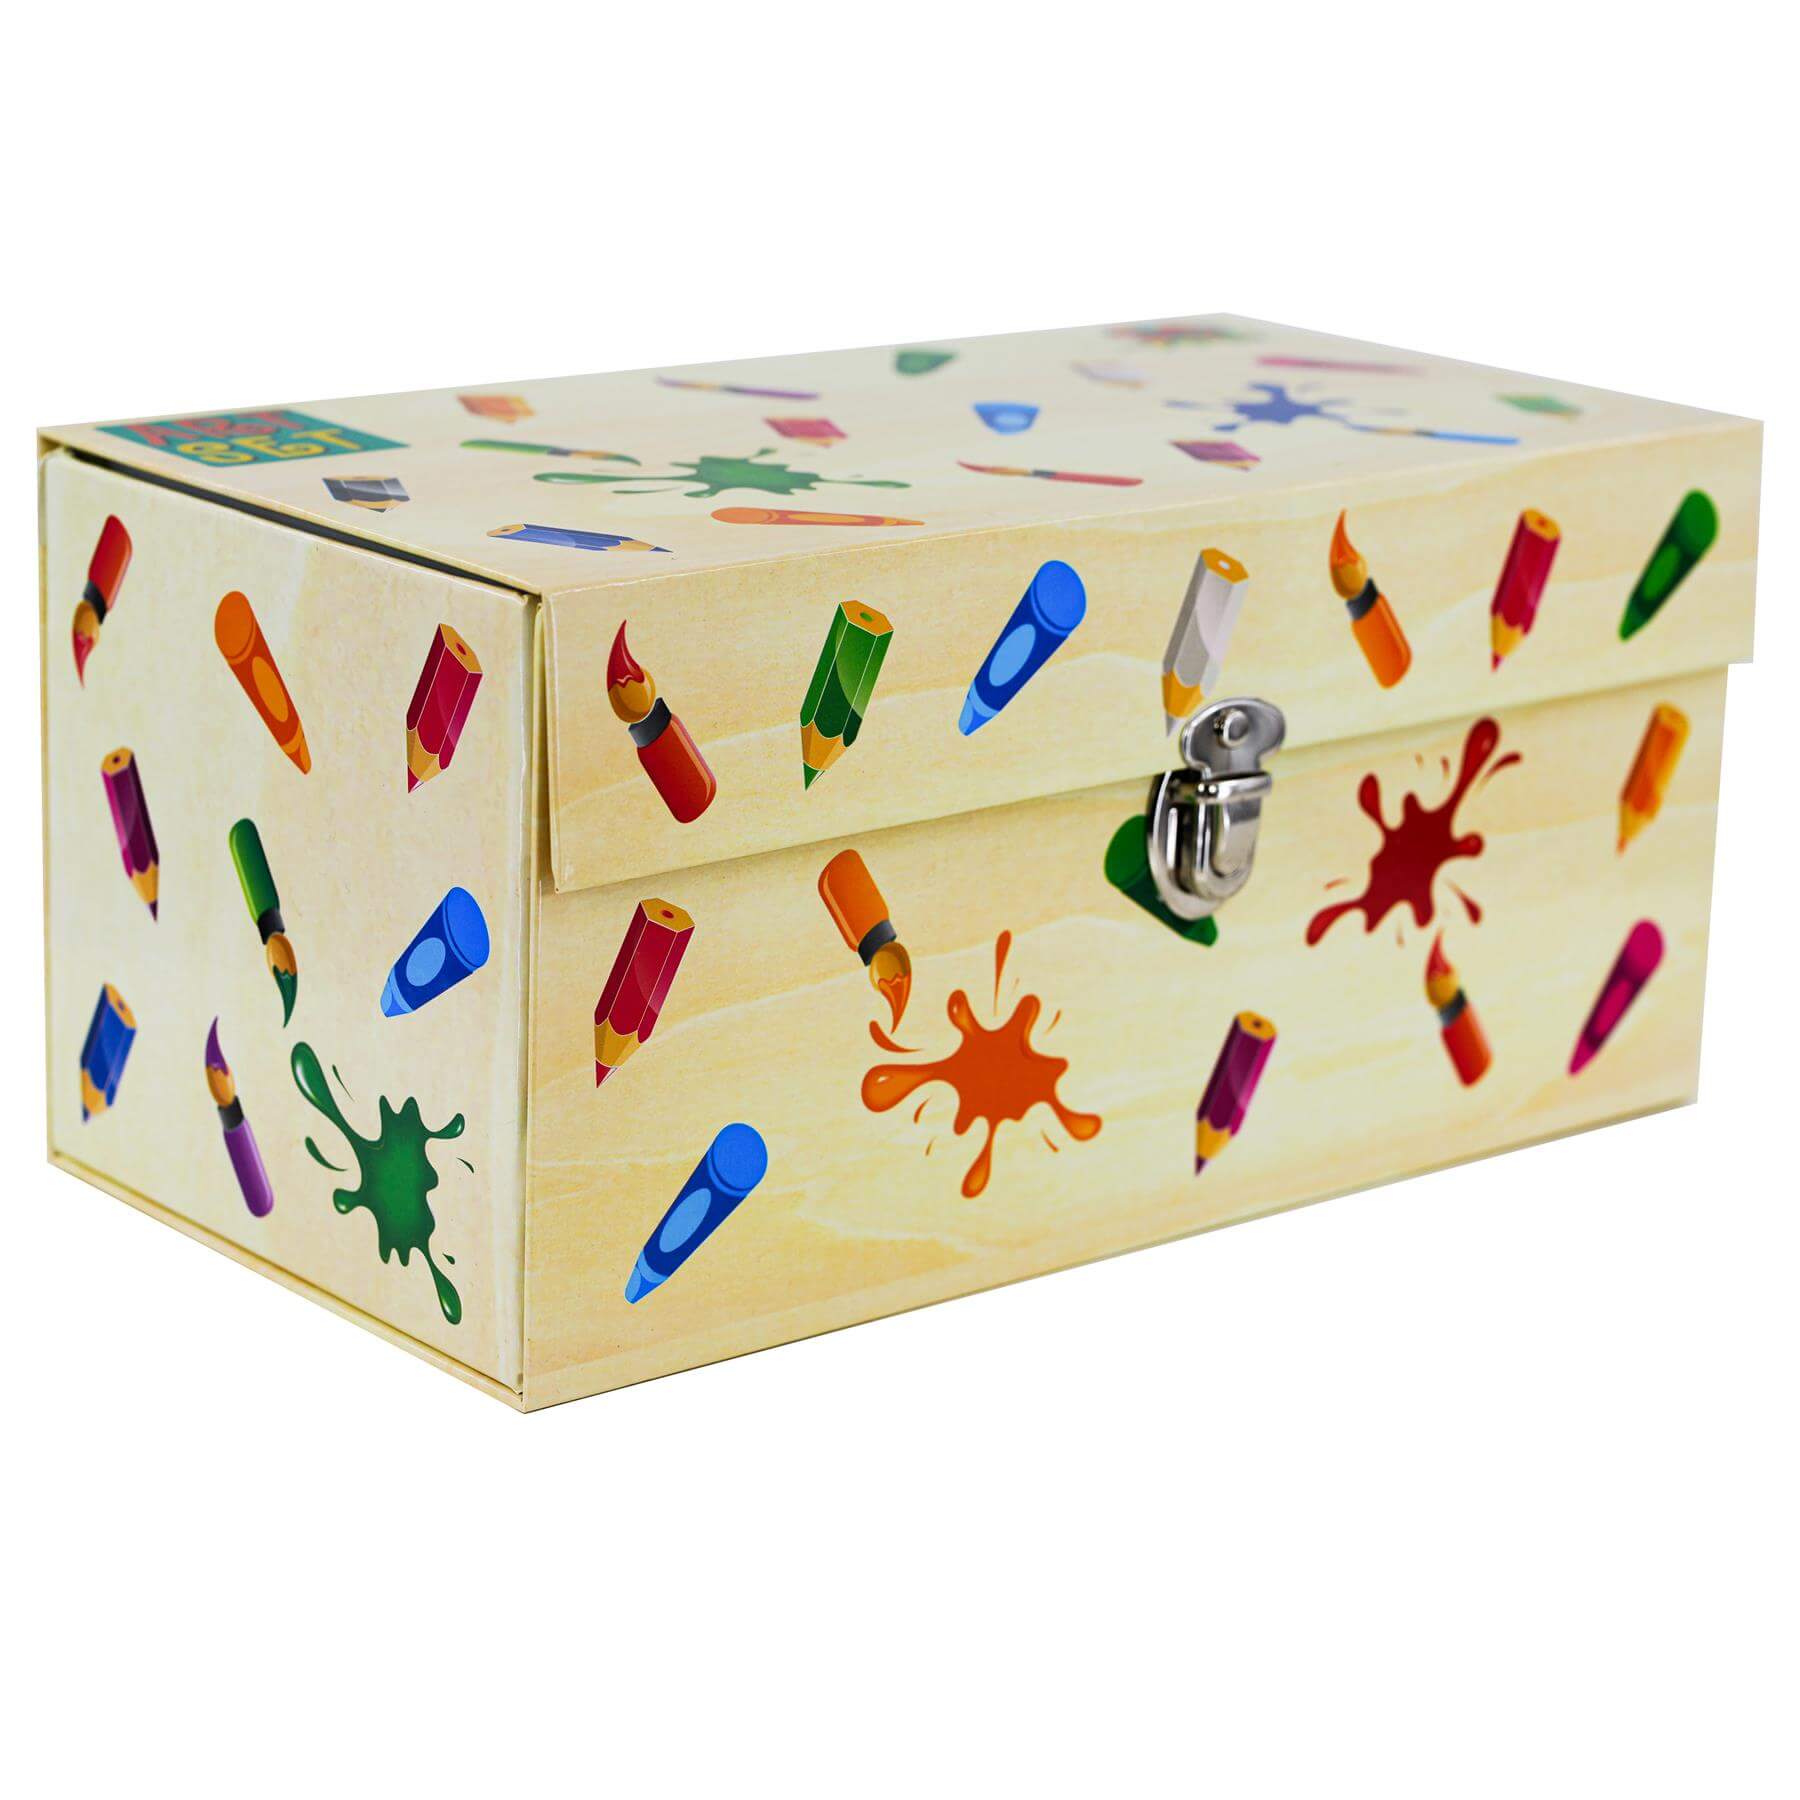 https://themagictoyshop.co.uk/cdn/shop/products/the-magic-toy-shop-drawing-54-pieces-craft-art-set-in-a-box-36274297471198.jpg?v=1701973671&width=1800